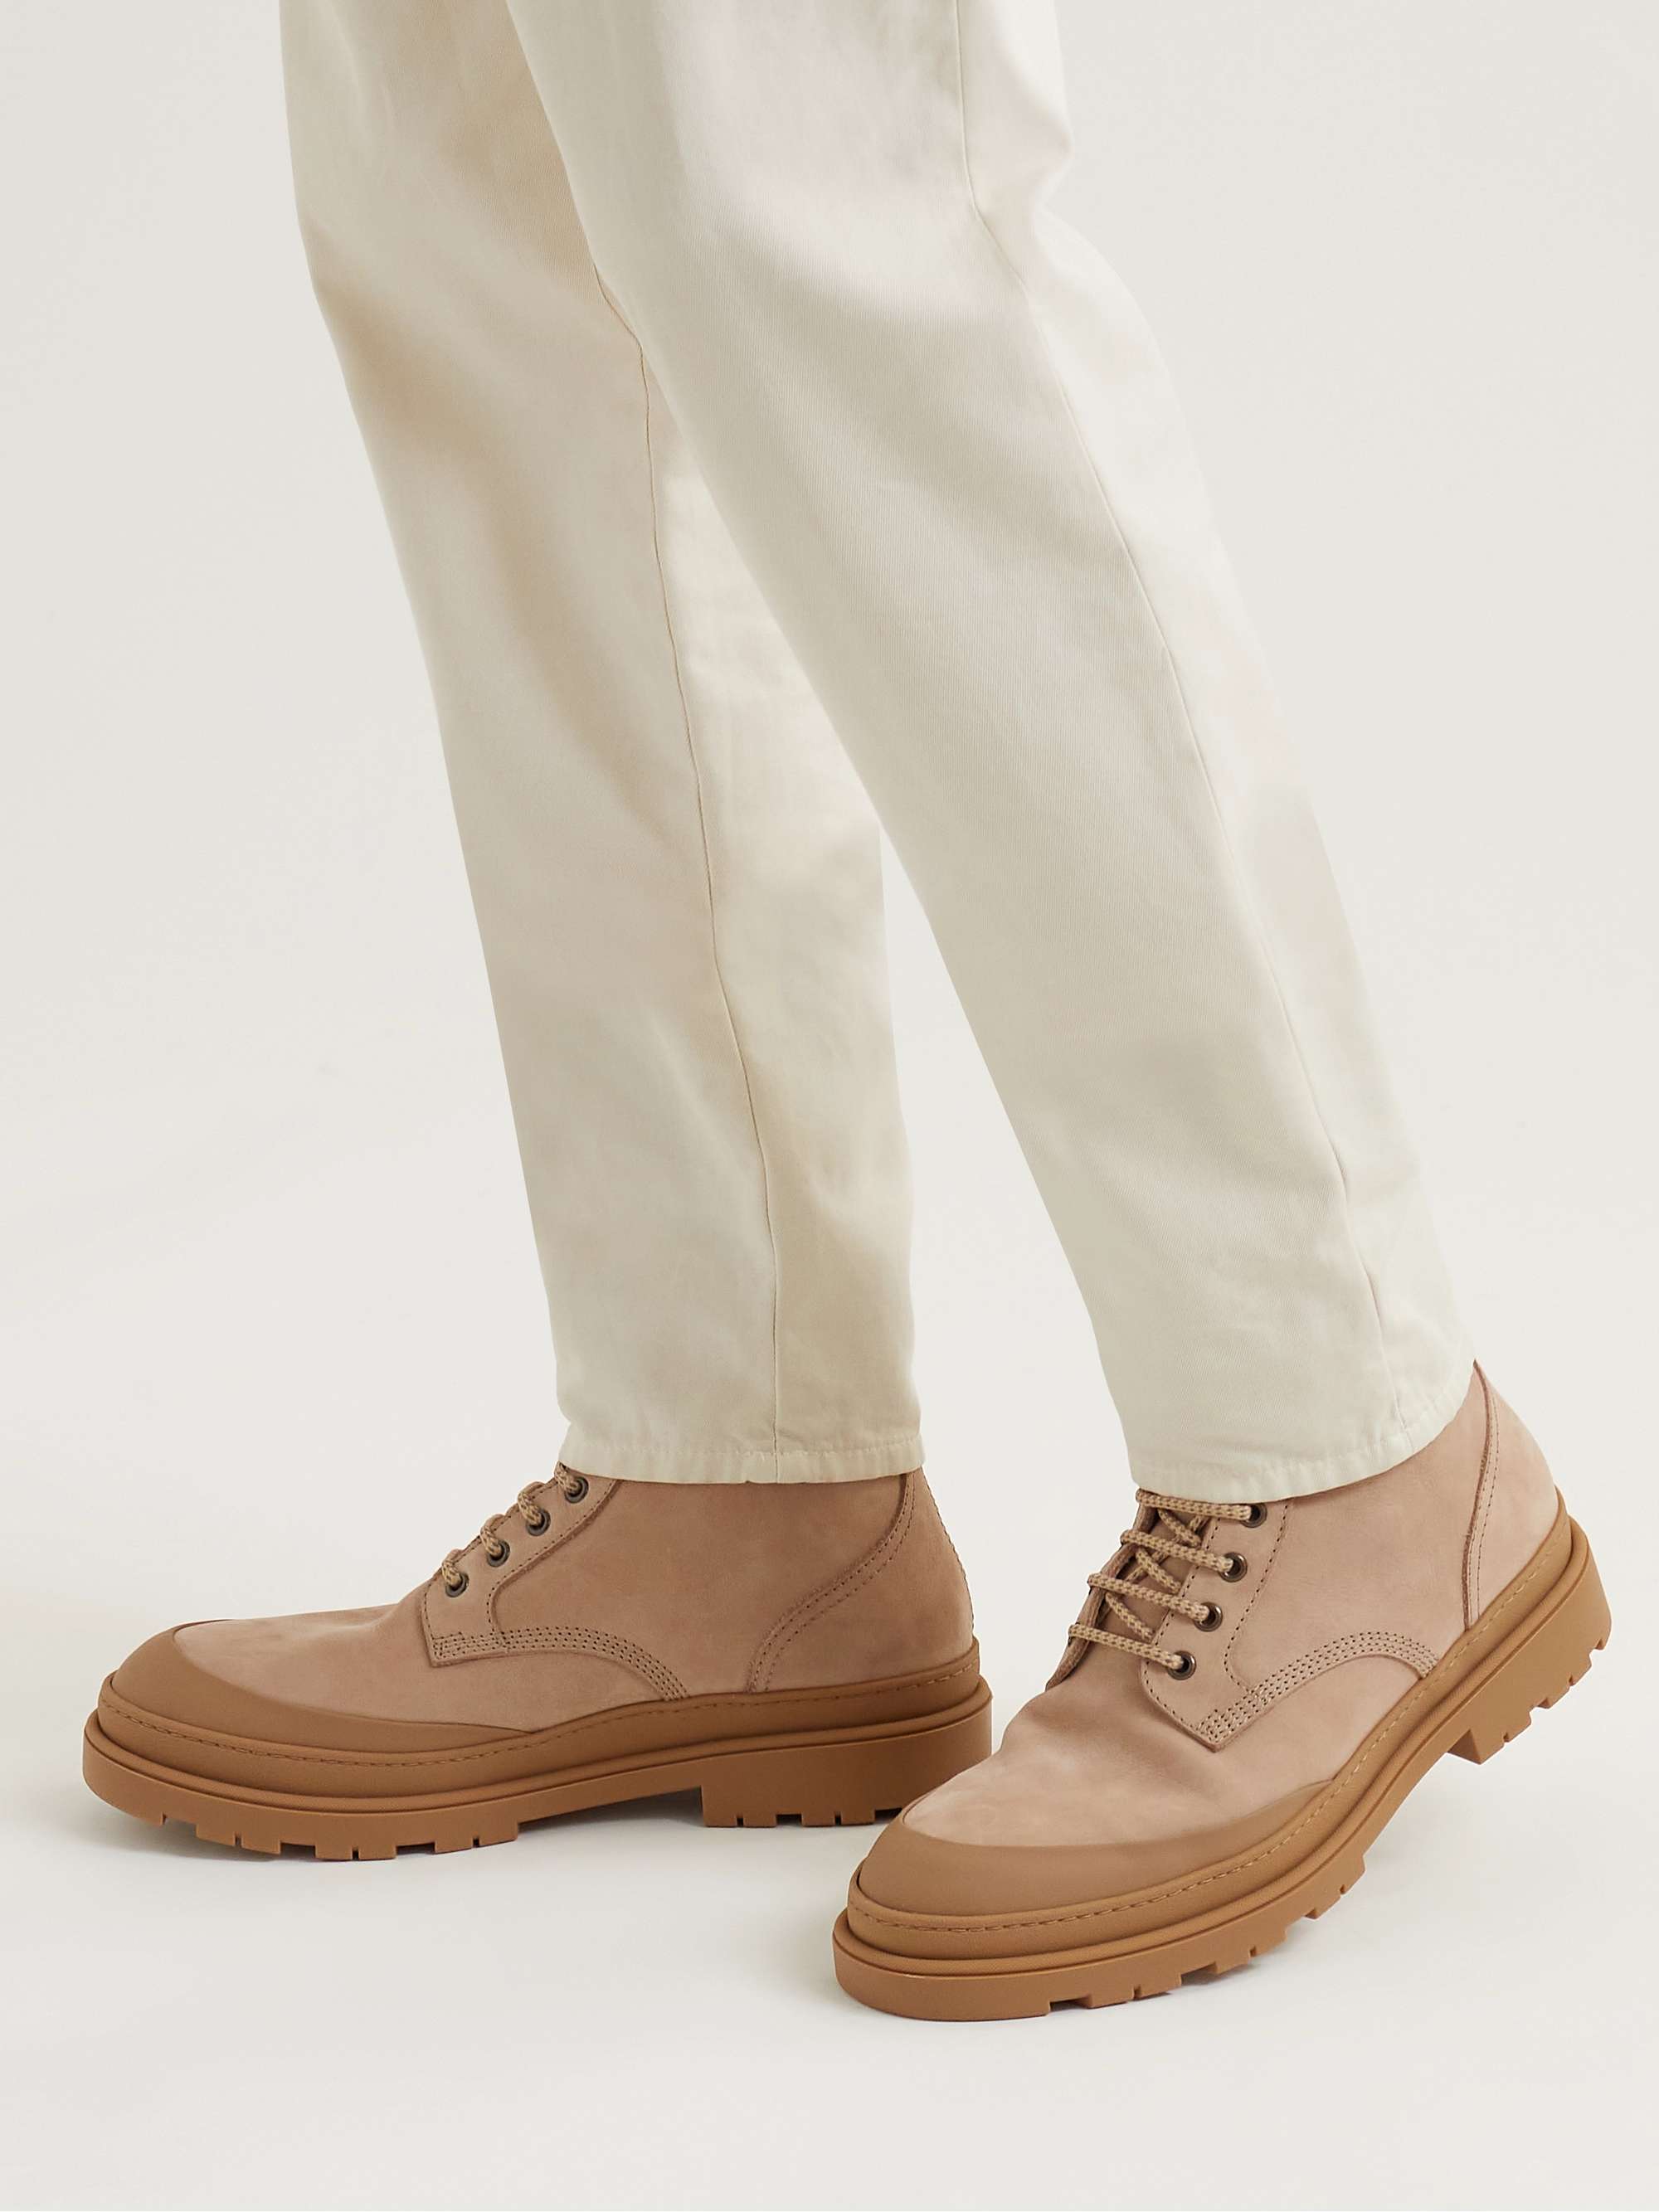 BRUNELLO CUCINELLI Shearling-Lined Suede Lace-Up Boots